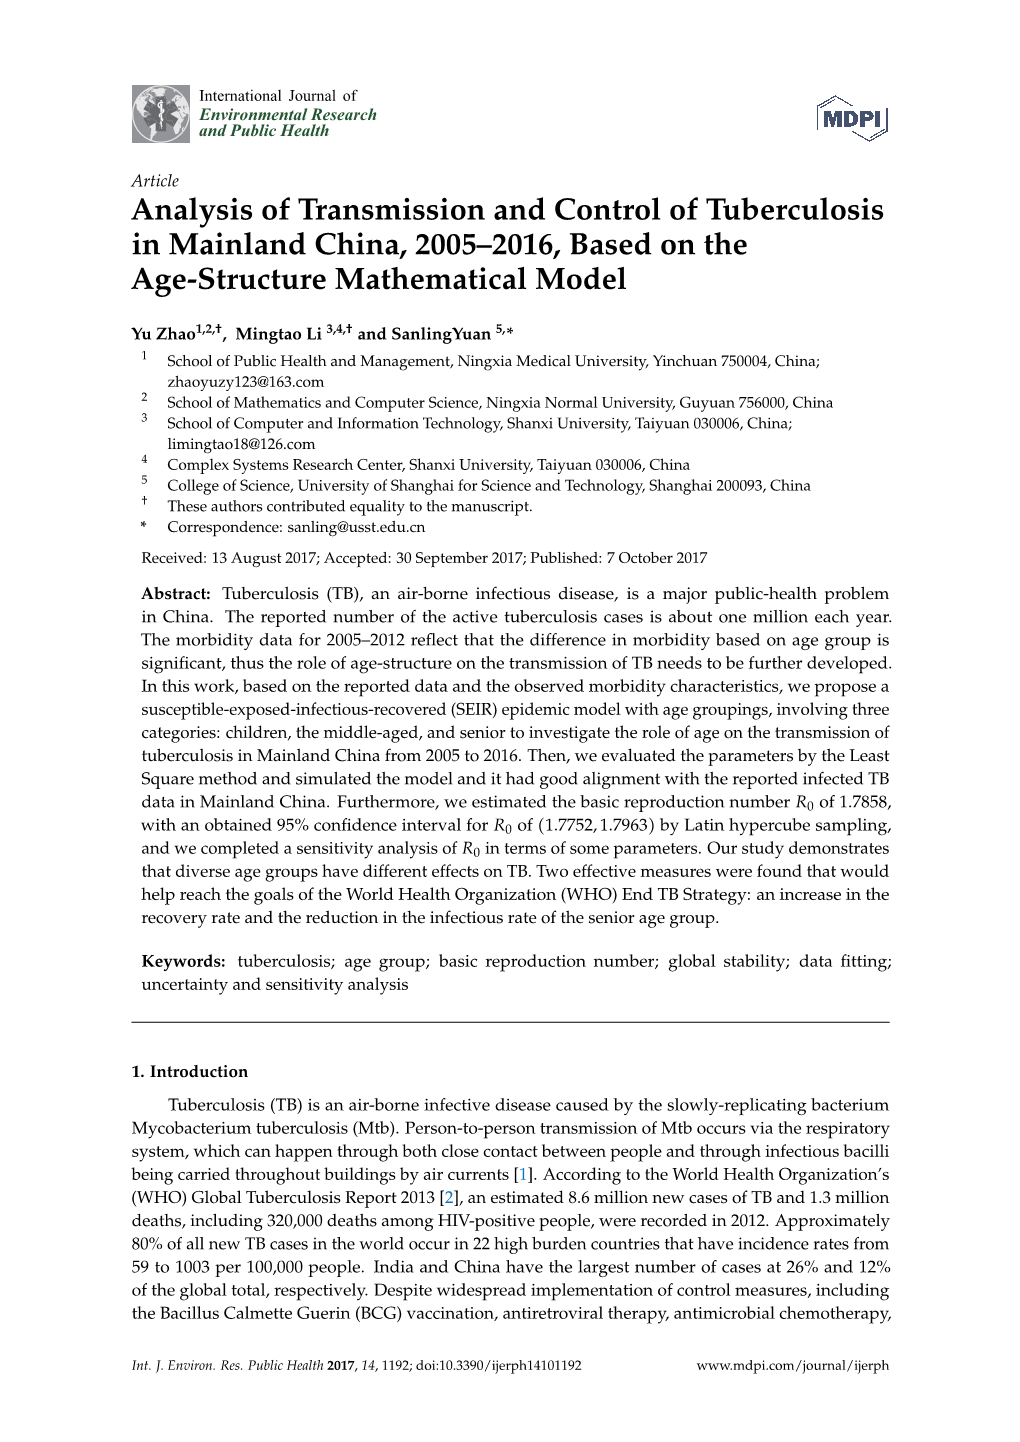 Analysis of Transmission and Control of Tuberculosis in Mainland China, 2005–2016, Based on the Age-Structure Mathematical Model